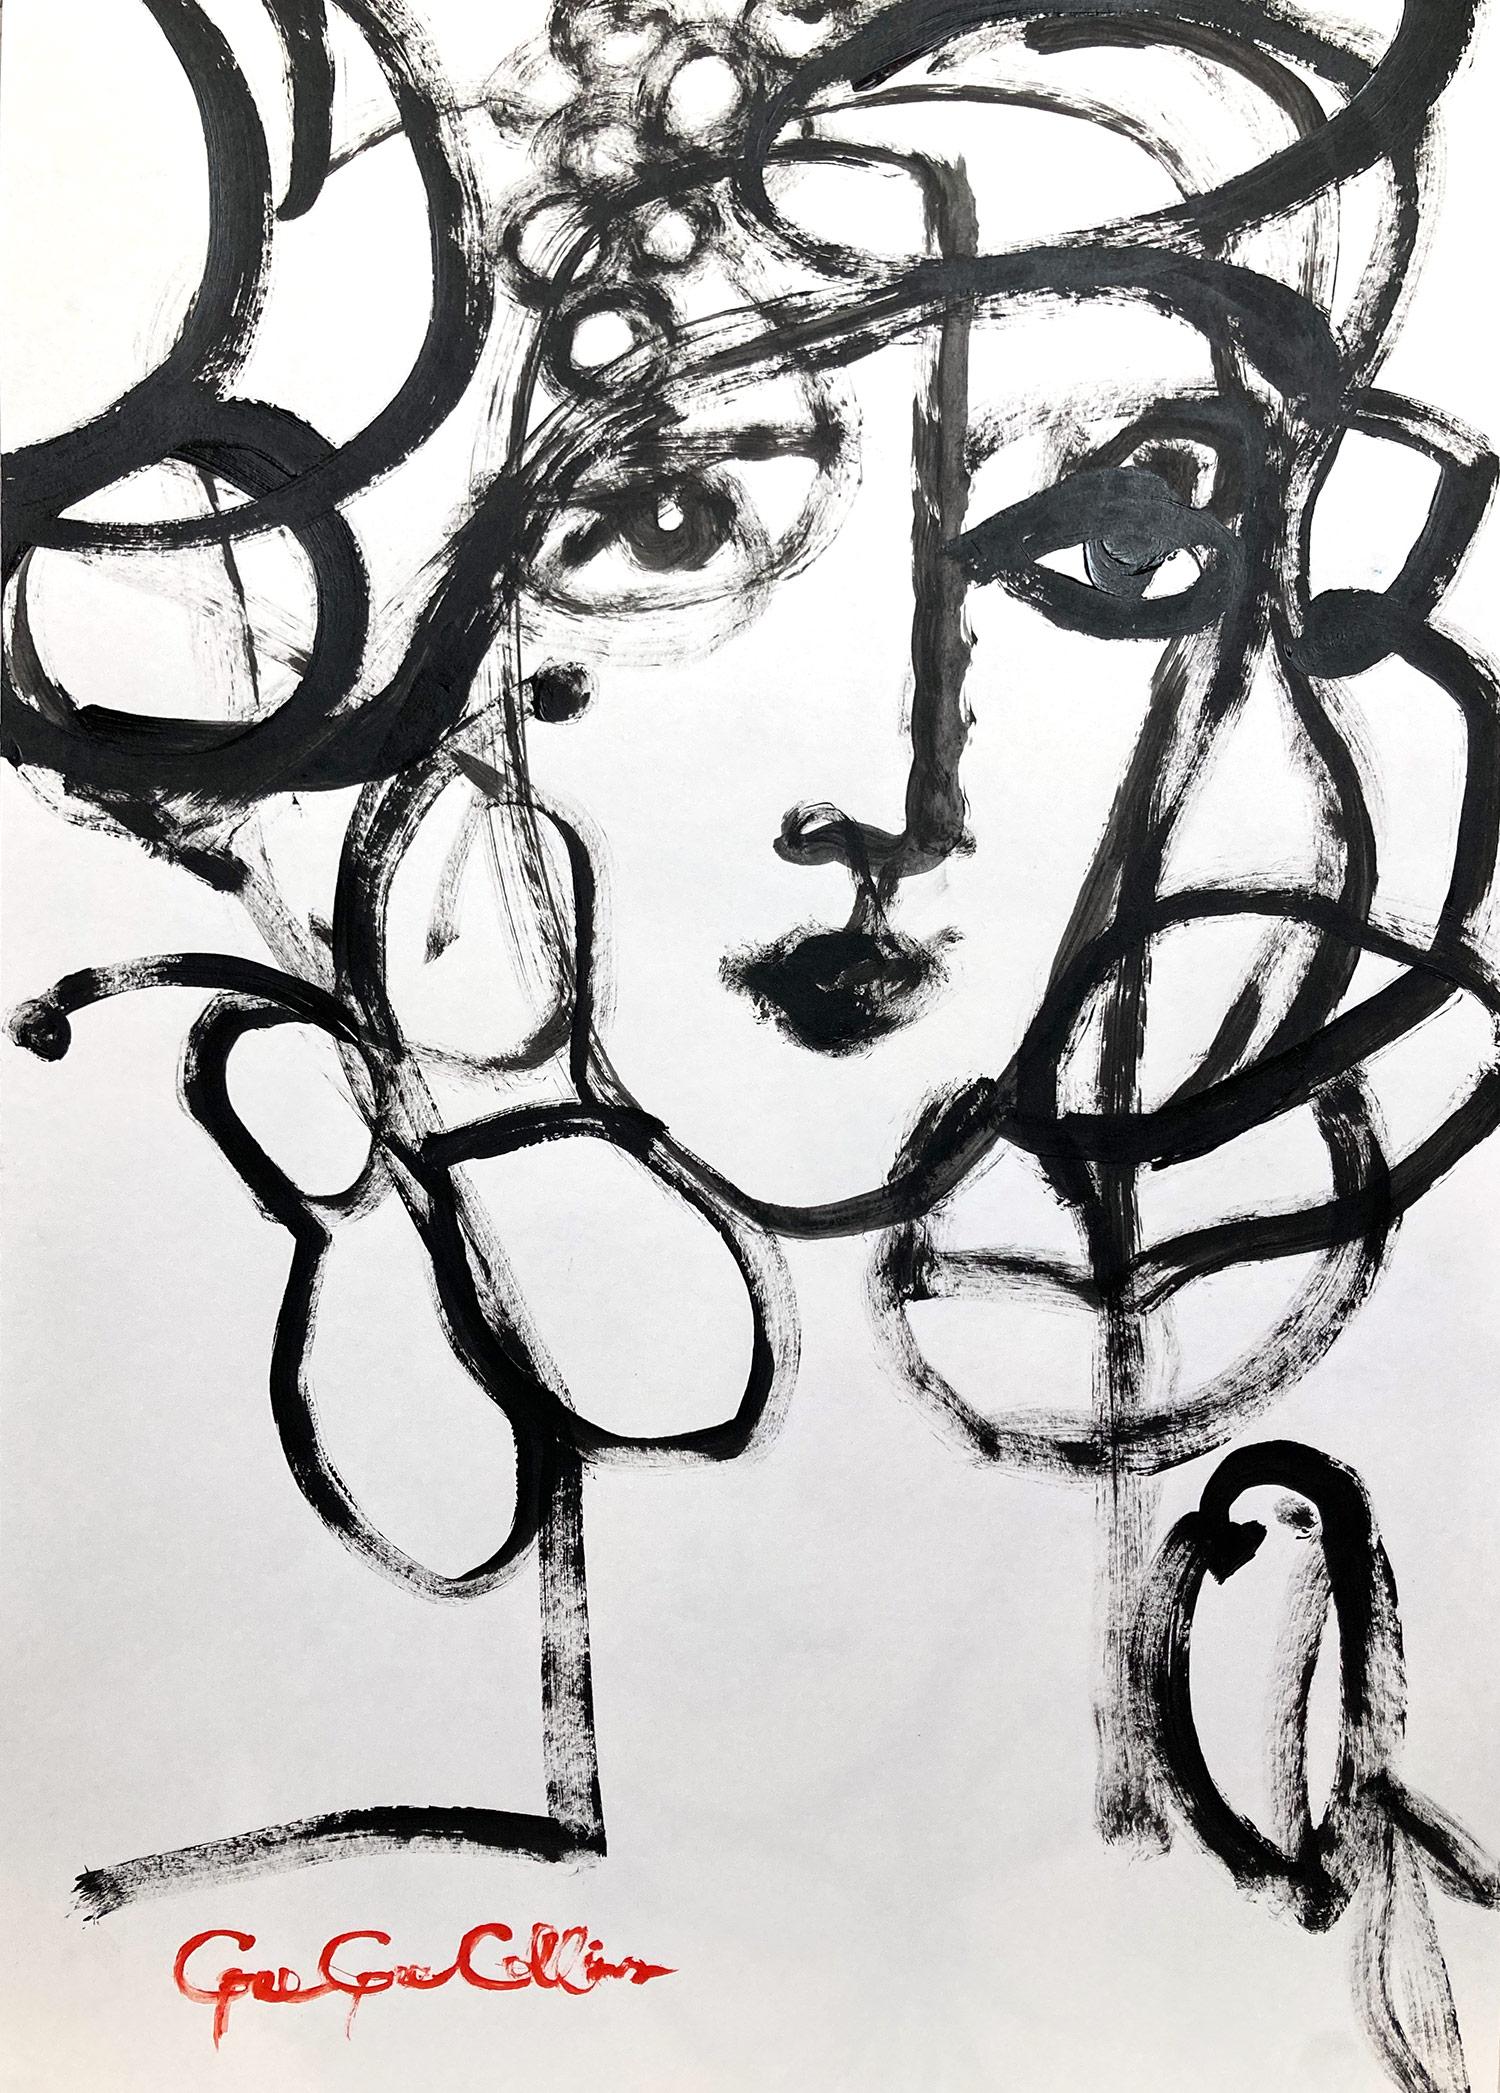 Gee Gee Collins Abstract Painting - "Madonna of Venice" Abstract Modern Black + White Painting on Heavy Weight Paper